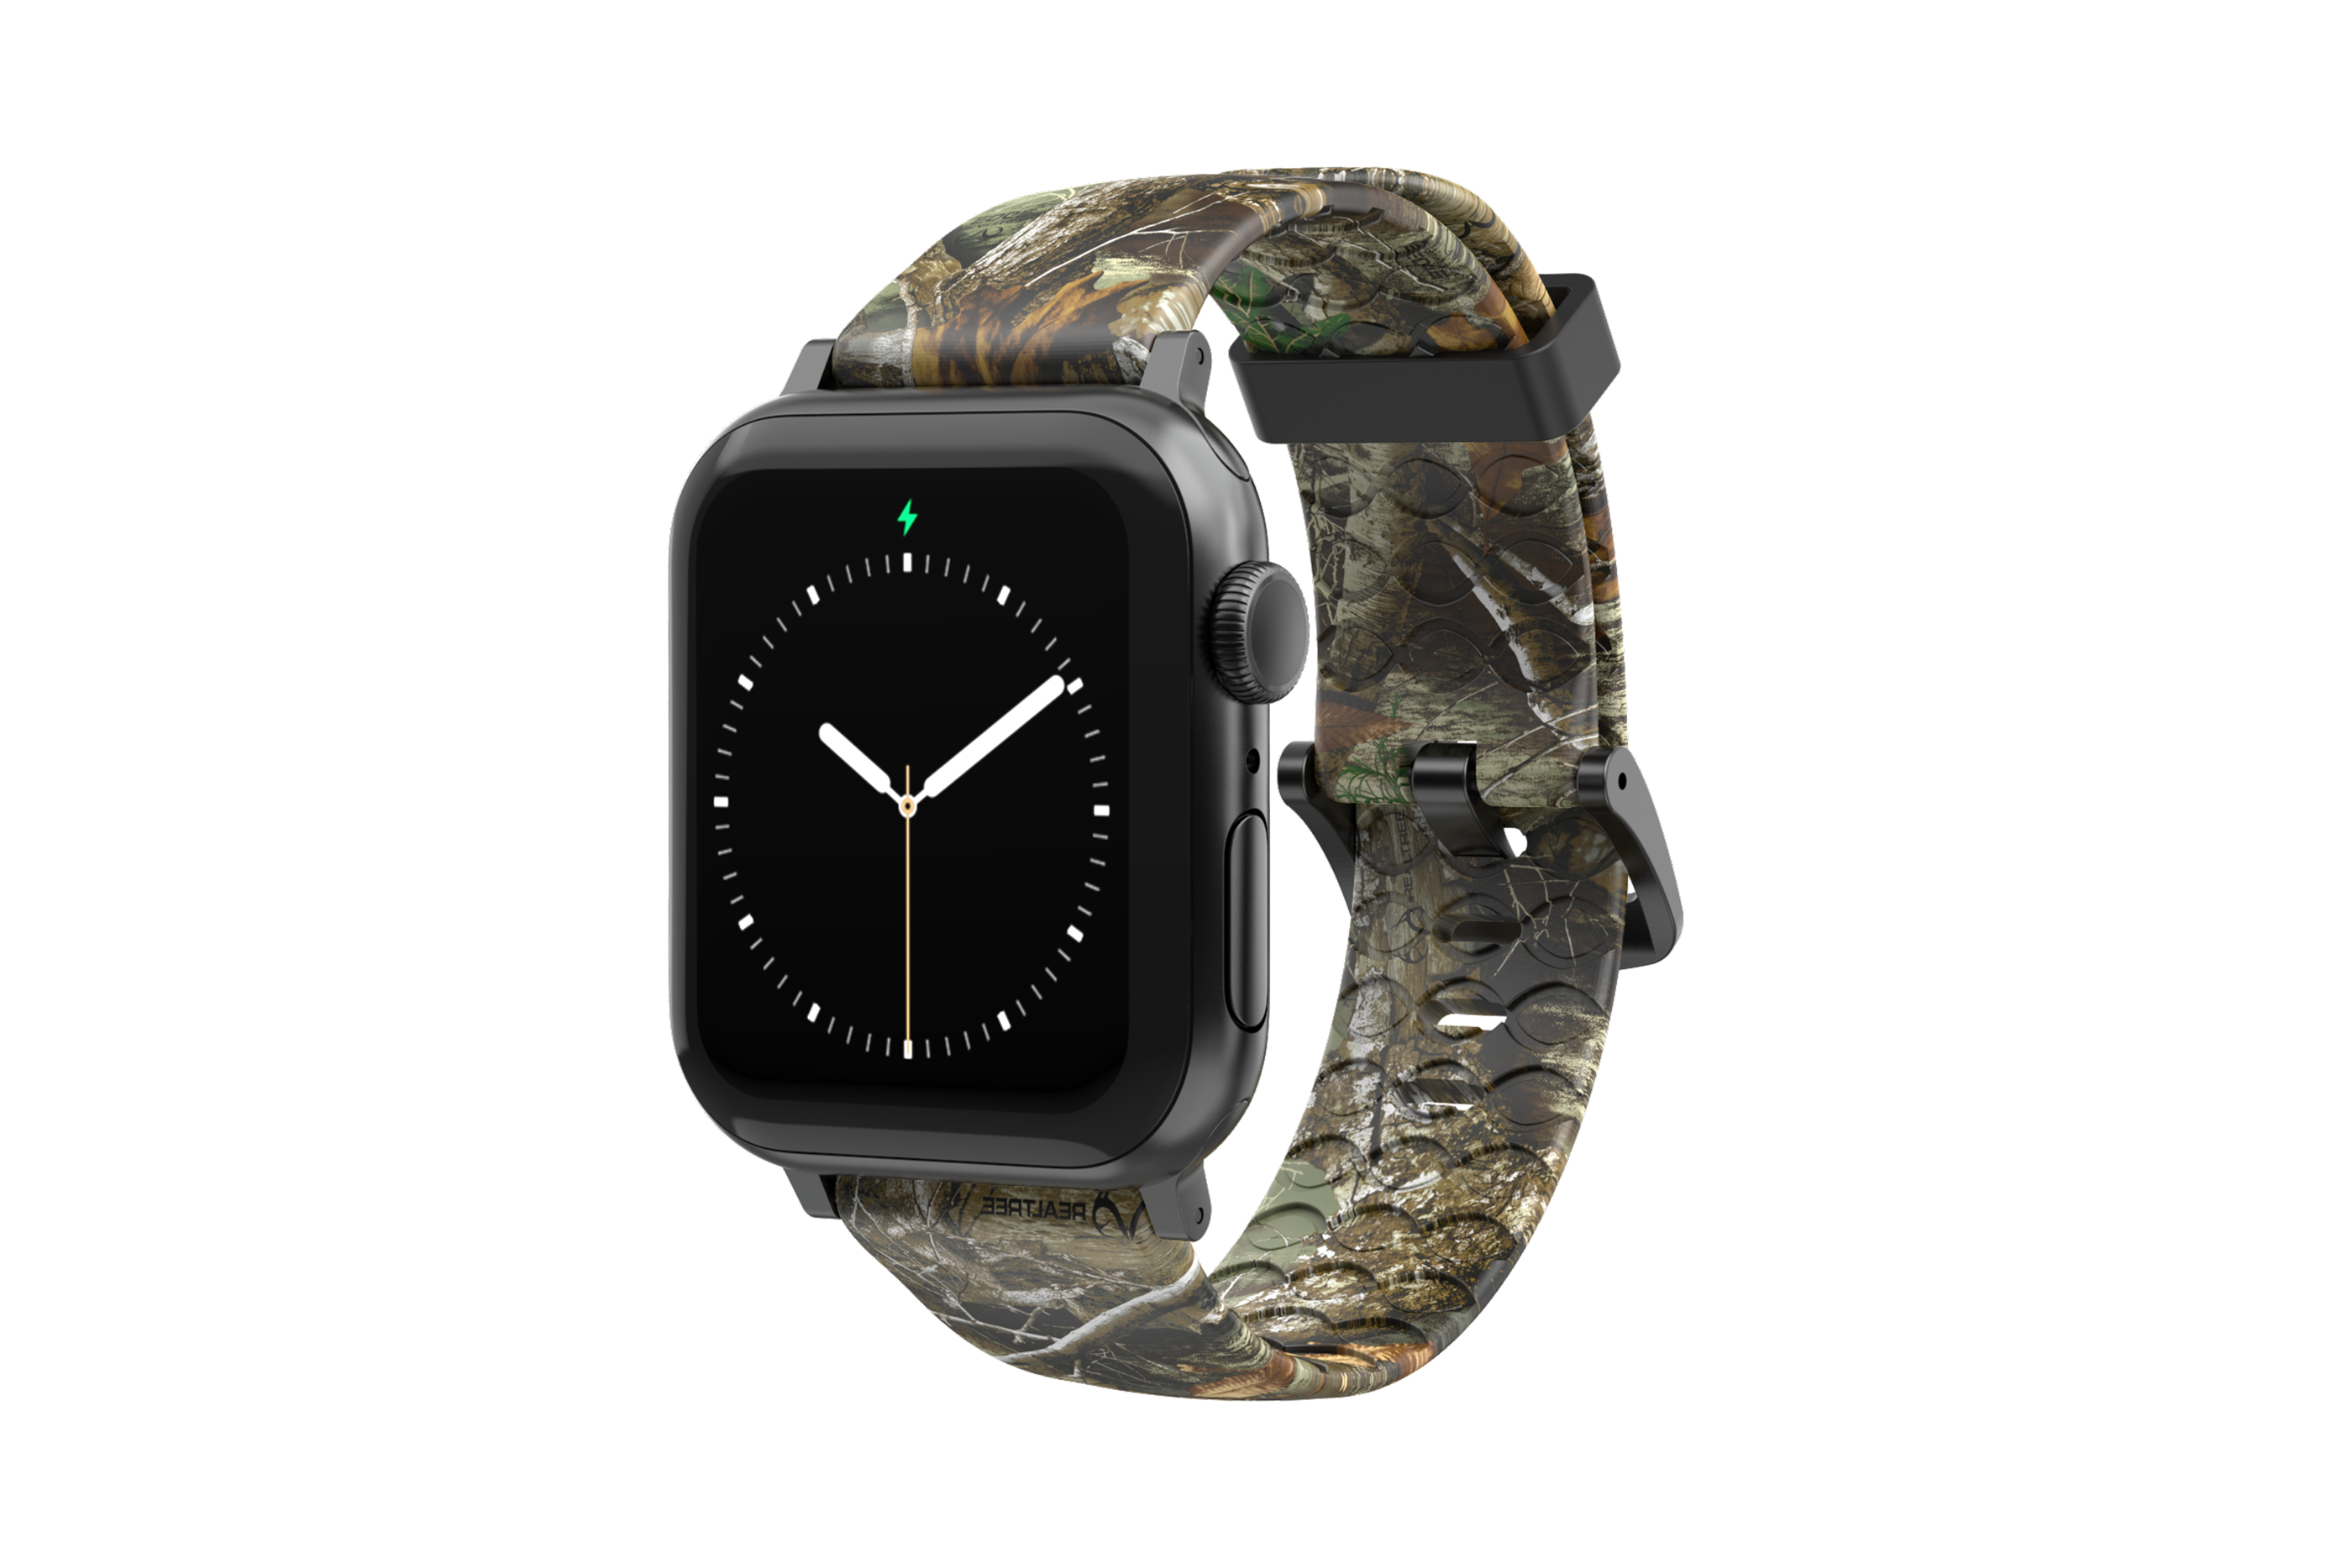 Realtree Edge Apple Watch Band with gray hardware viewed front on